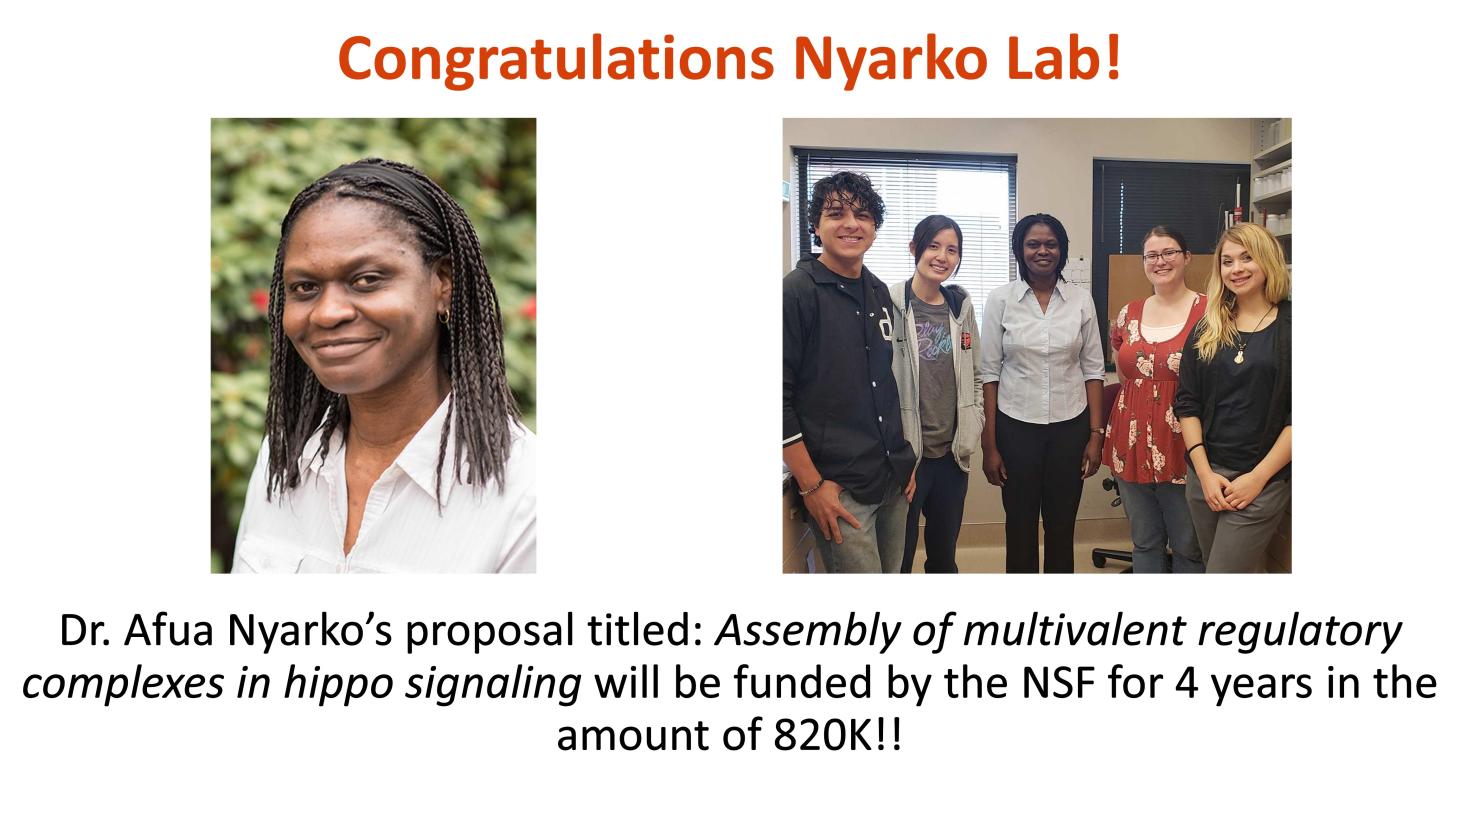 Portrait of Afua Nyarko next to a group photo of her lab students.